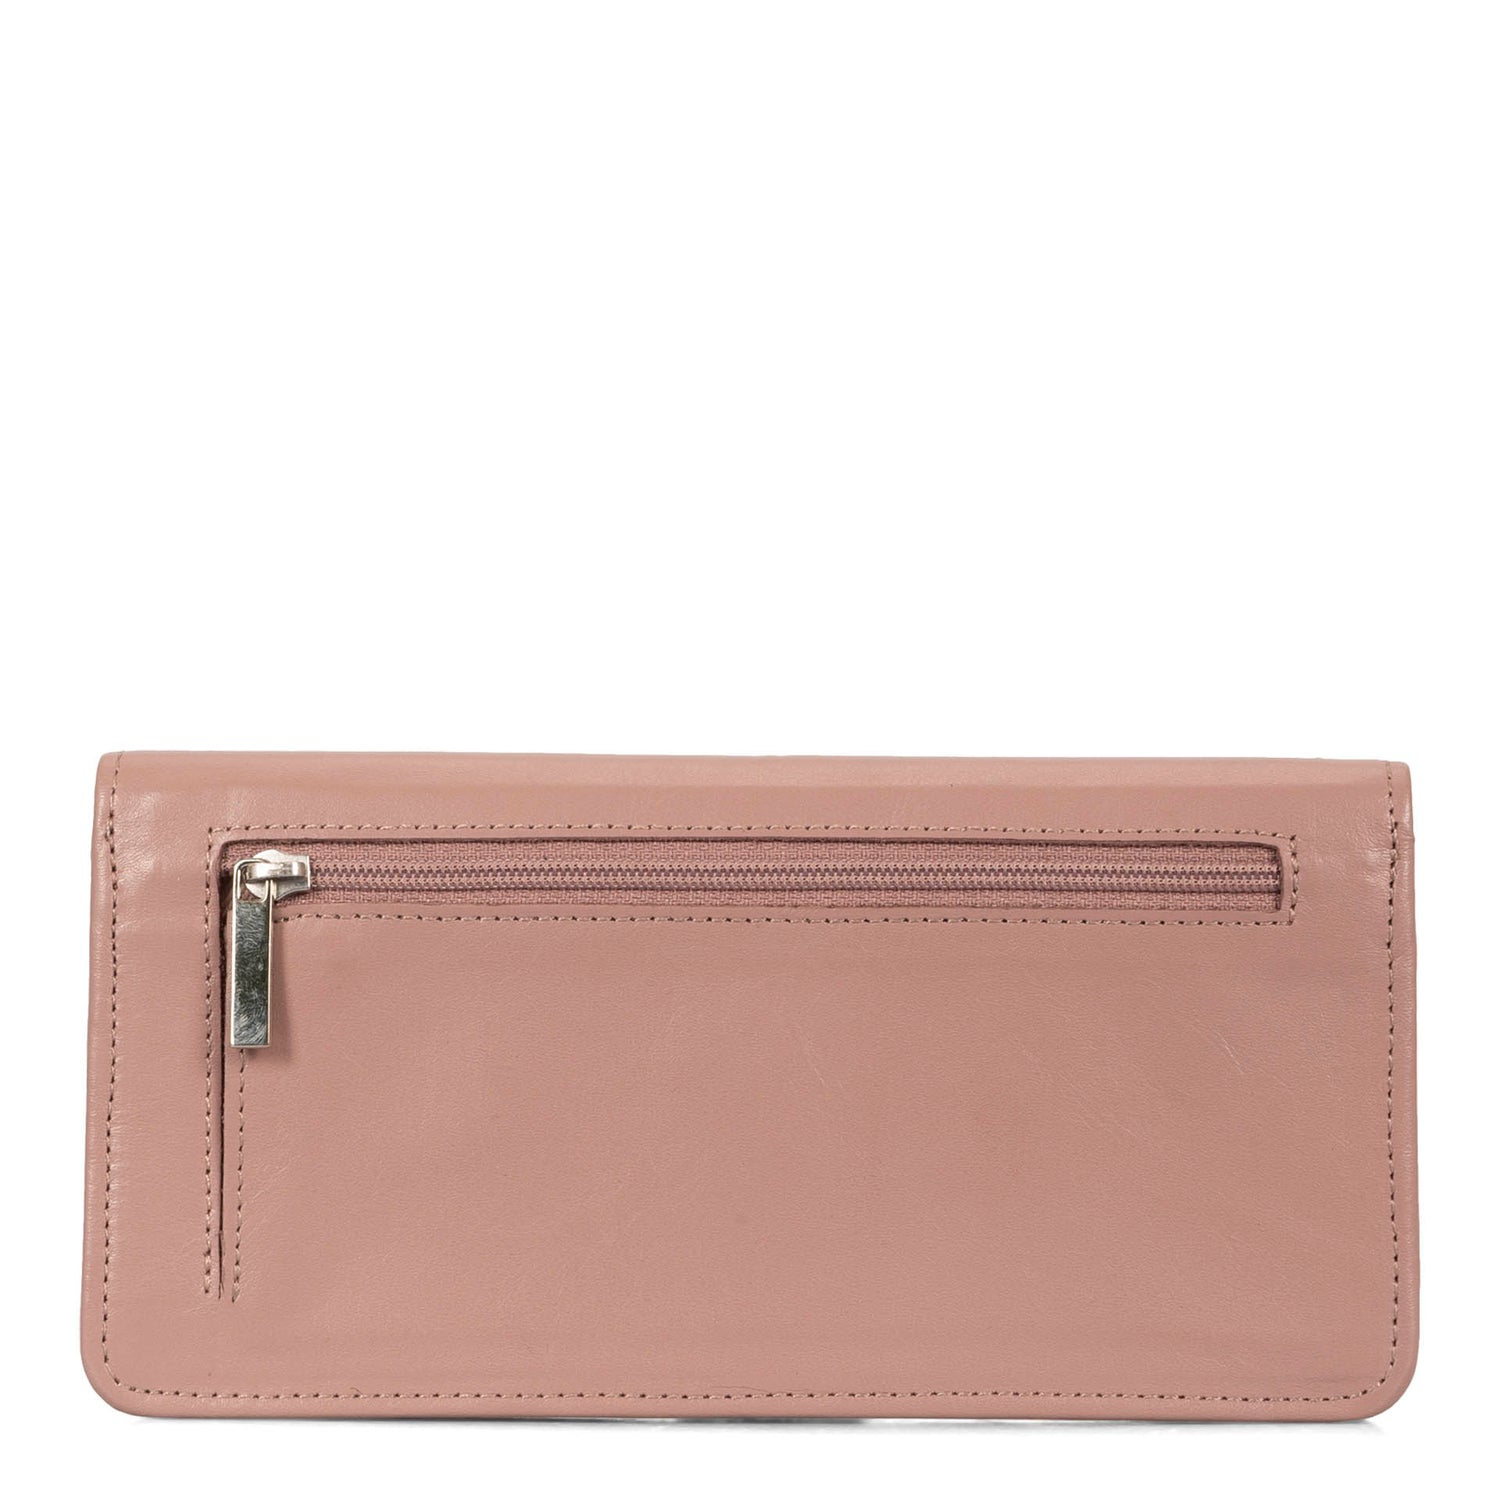 Back side of a pink women's wallet called Kelly designed by Tracker showing its hidden exterior compartment and smooth leather texture.